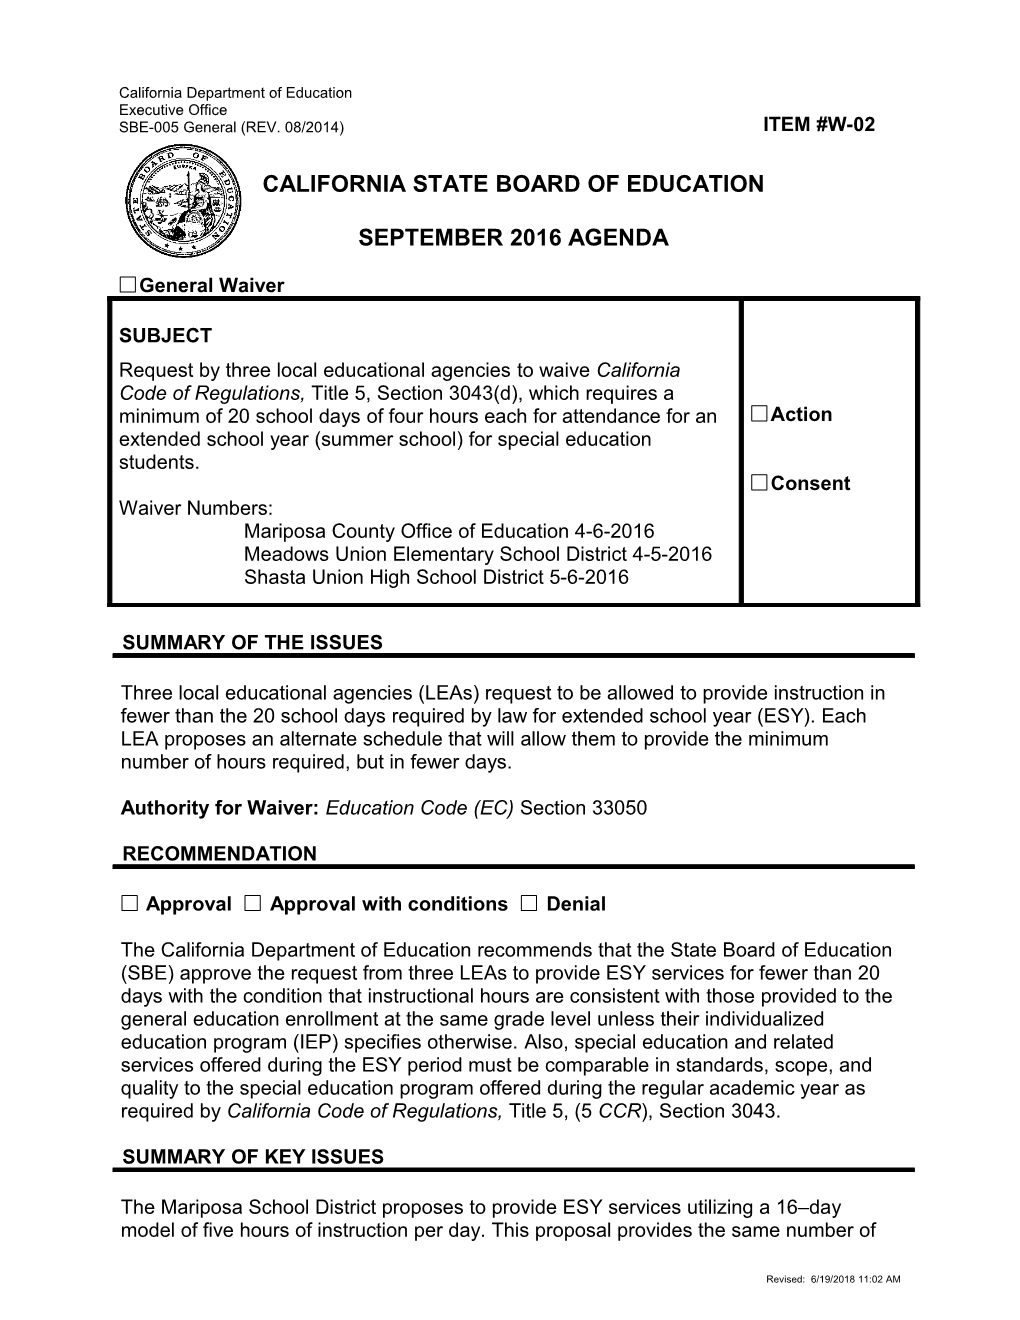 September 2016 Waiver Item W-02 - Meeting Agendas (CA State Board of Education)